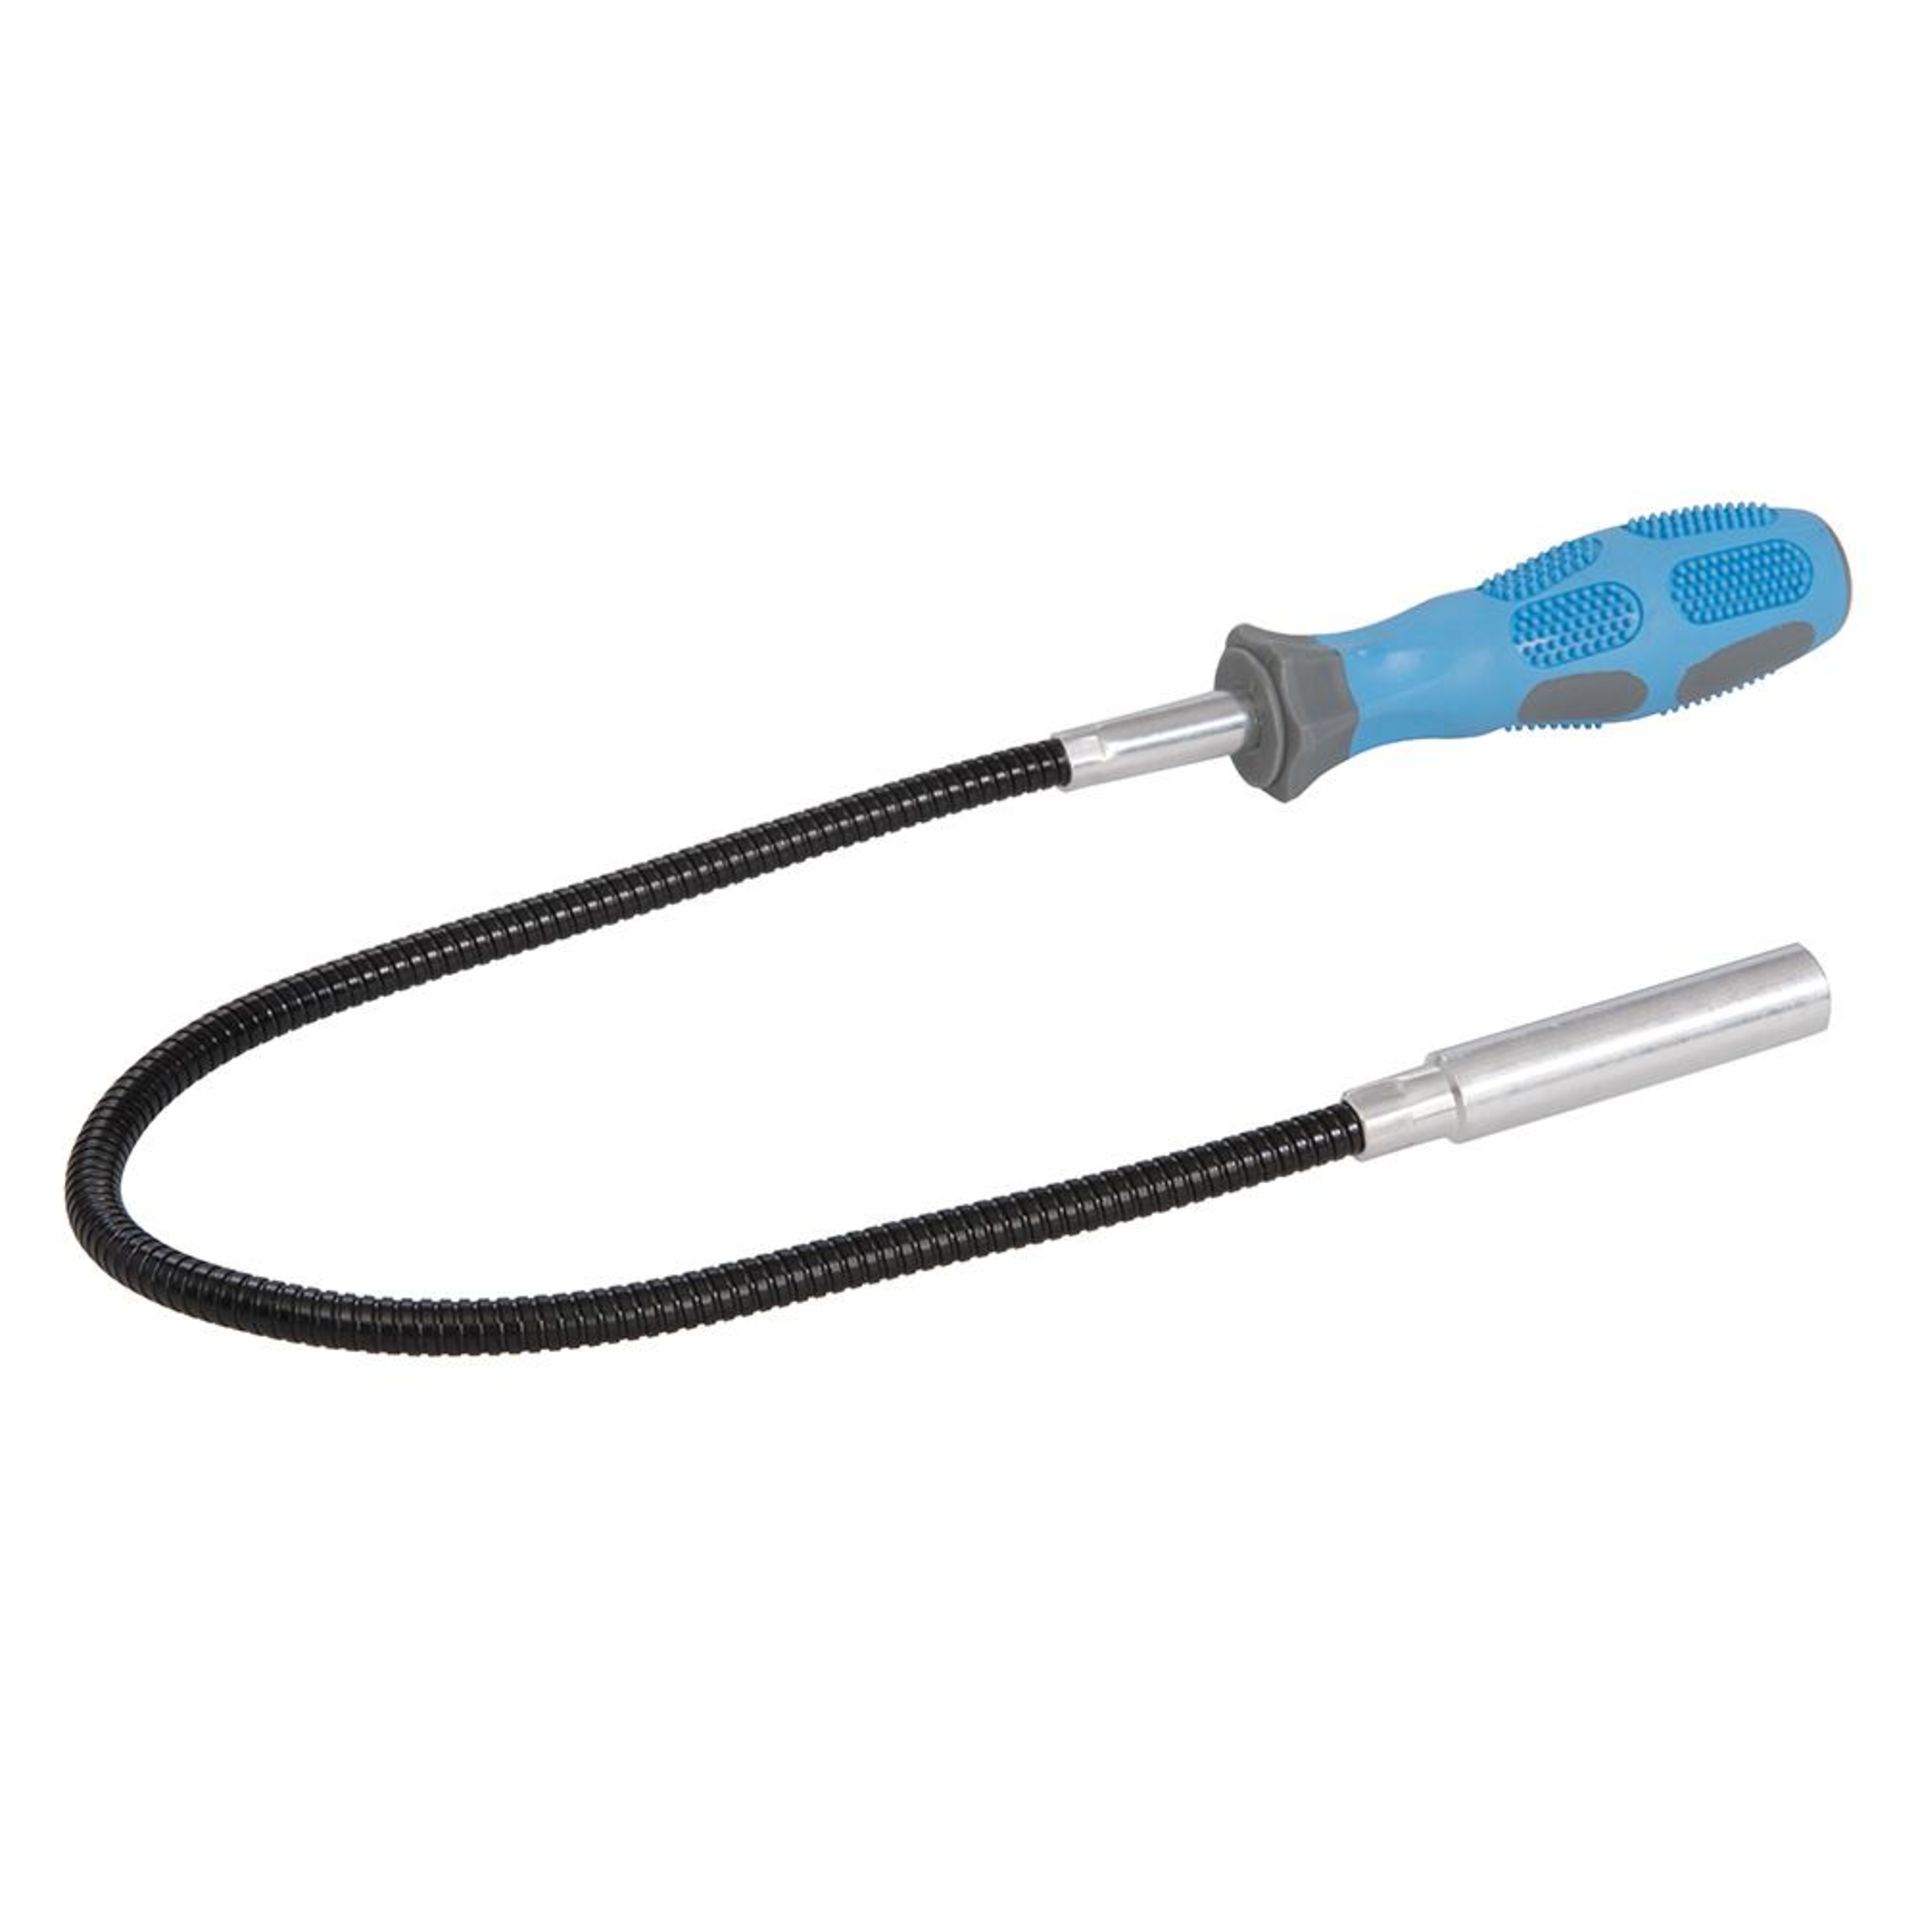 SILVERLINE FLEXIBLE MAGNETIC PICK-UP TOOLCondition ReportAppraisal Available on Request- All Items